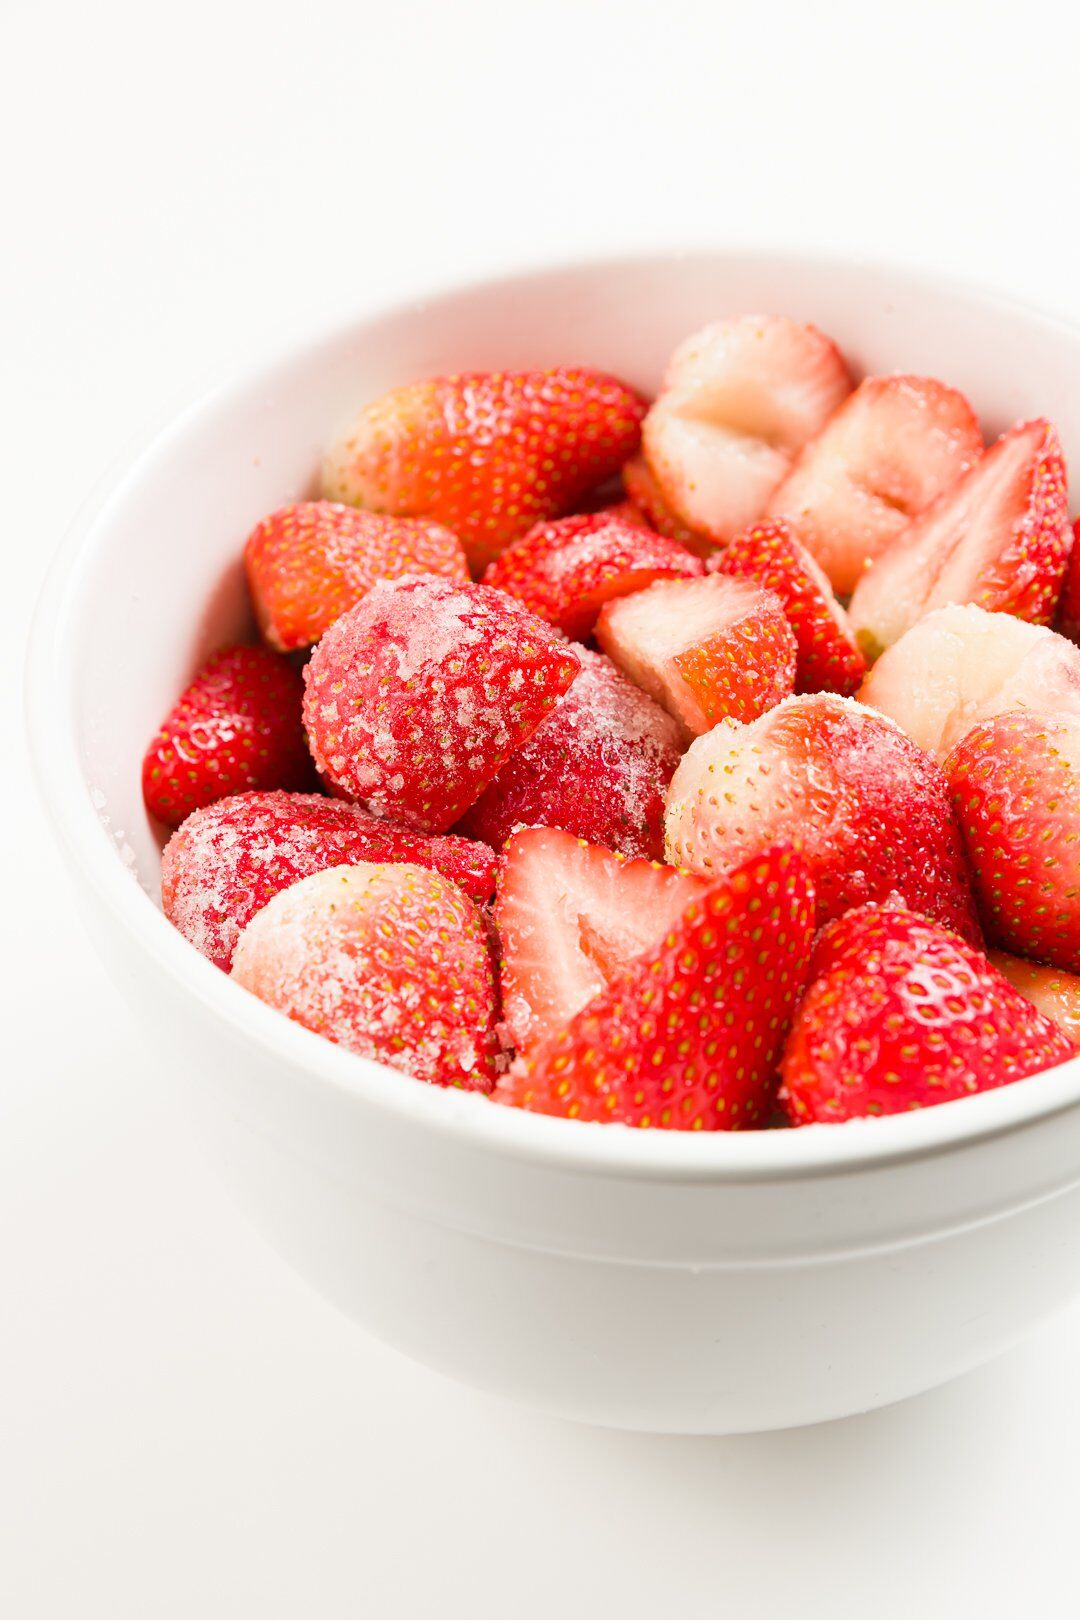 A large bowl of strawberries coated with sugar